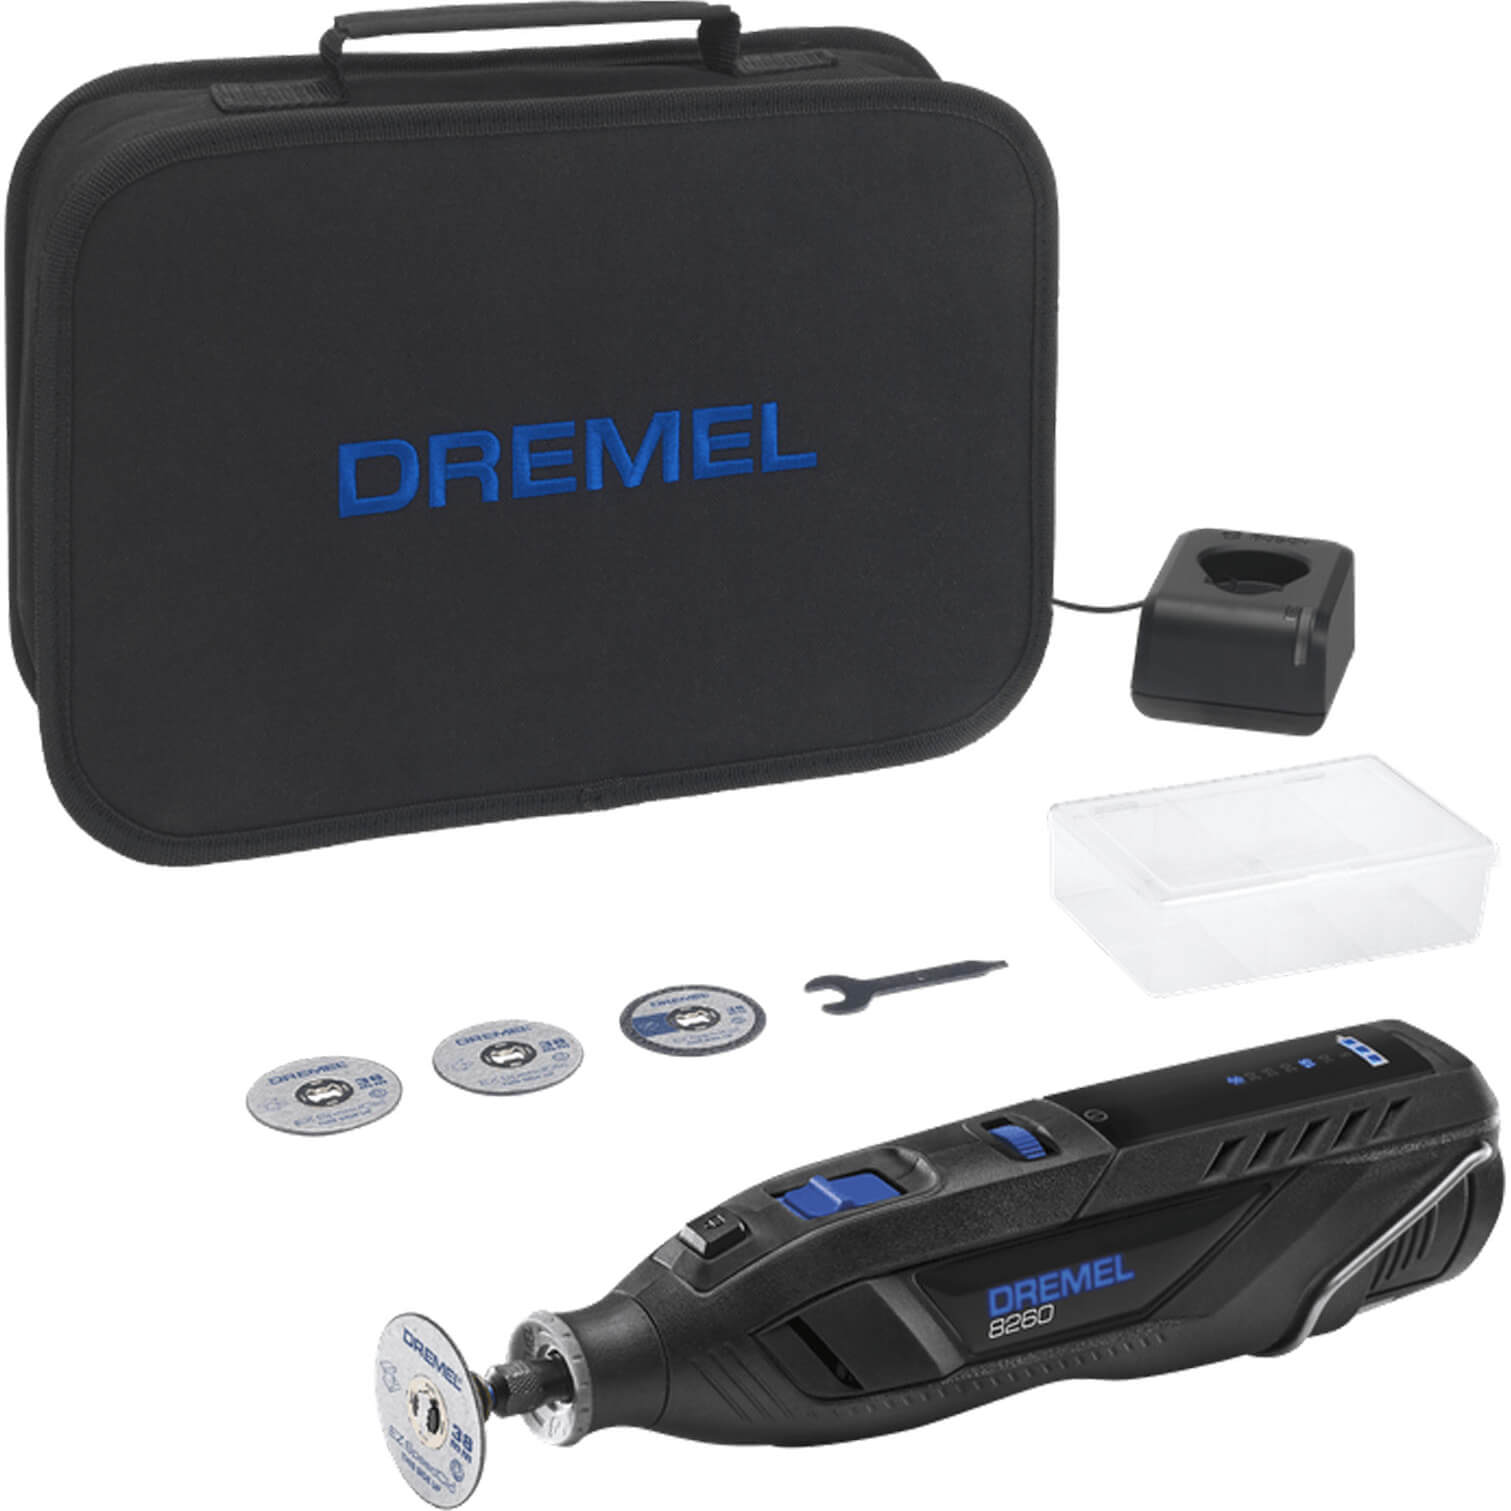 Photos - Multi Power Tool Dremel 8260 12v Cordless Brushless Rotary Multi Tool and 5 Accessories 1 x 